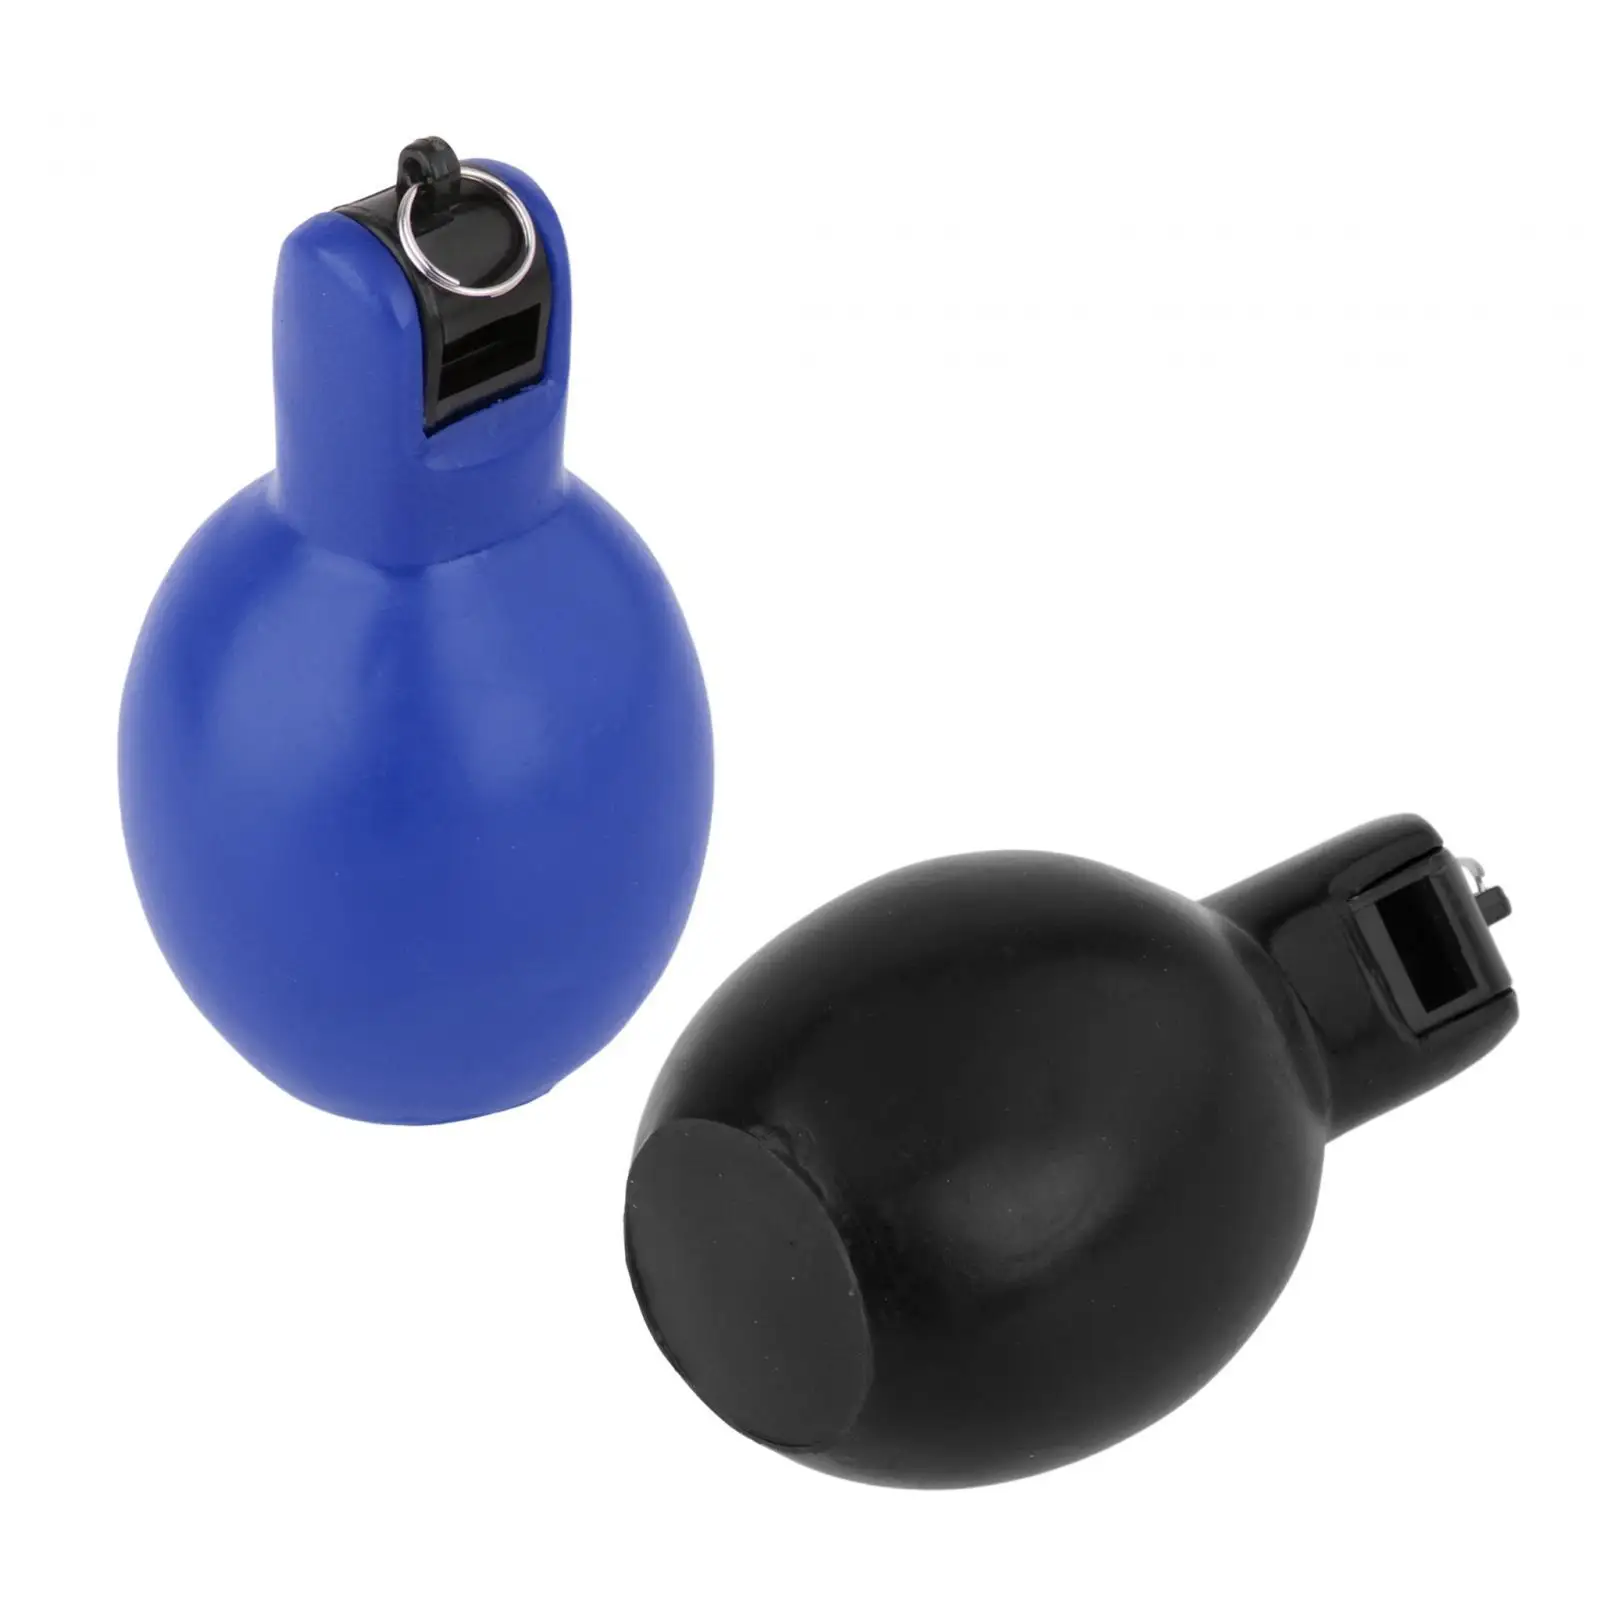 Hand Squeeze Whistles, 2 Pack Coaches Whistle for Coaches Referees, Handheld